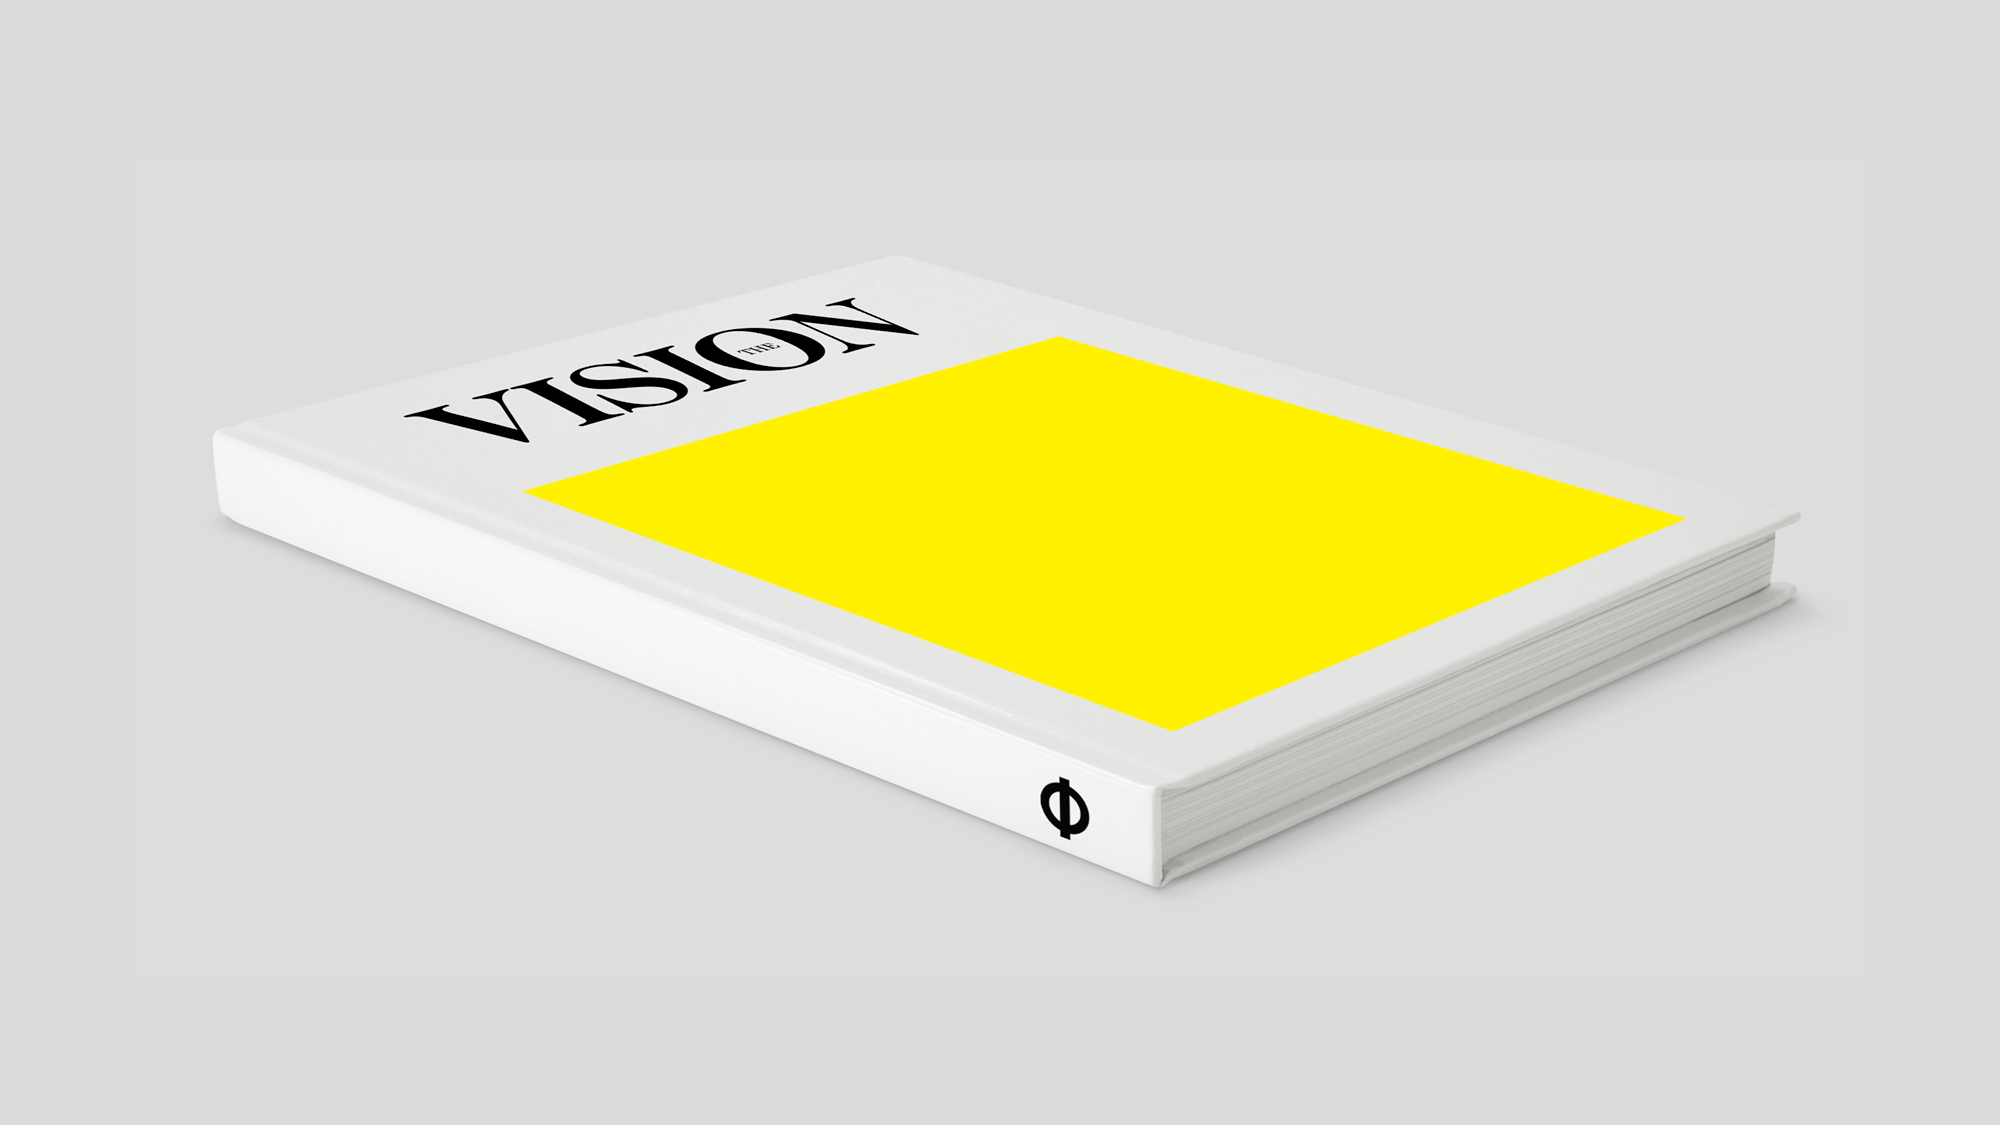 Entity-3-Three-Brand-Design-Agency-Sydney-Transport-for-London-Vision-2-experience-print-book-cover-type